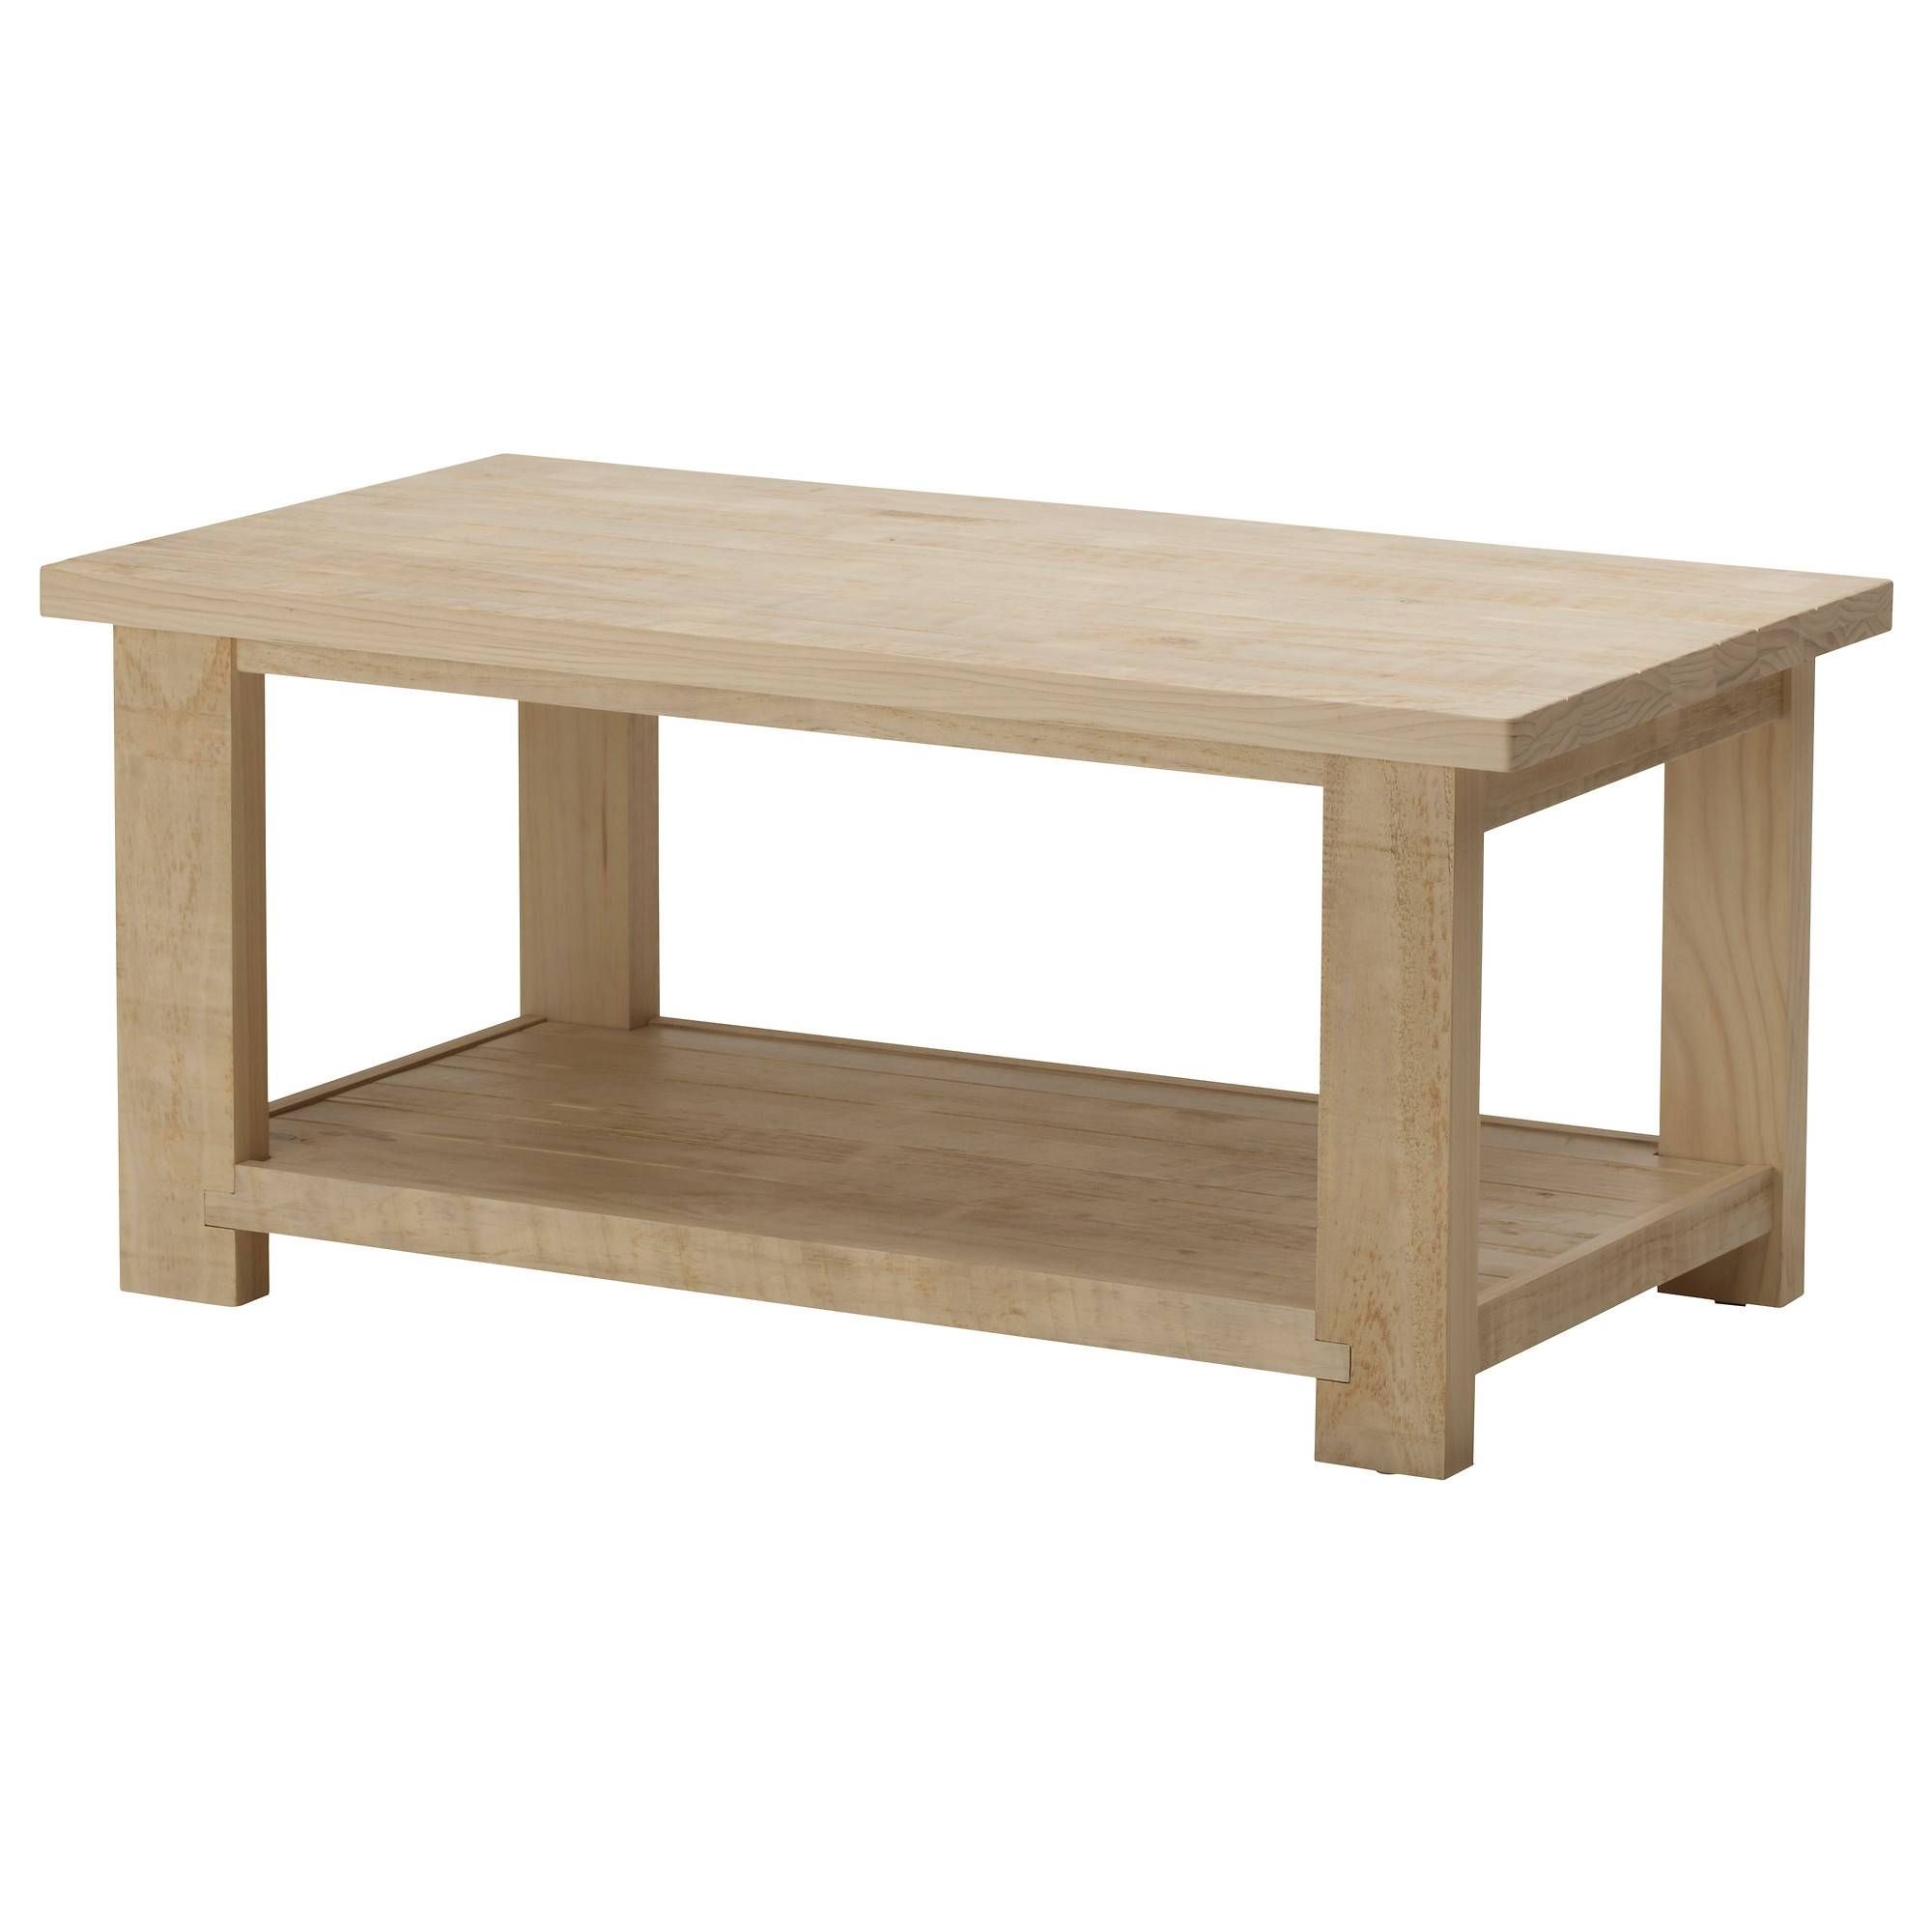 Wonderful Design Of Wooden Coffee Table – Wooden Coffee Tables Throughout Pine Coffee Tables With Storage (View 14 of 30)